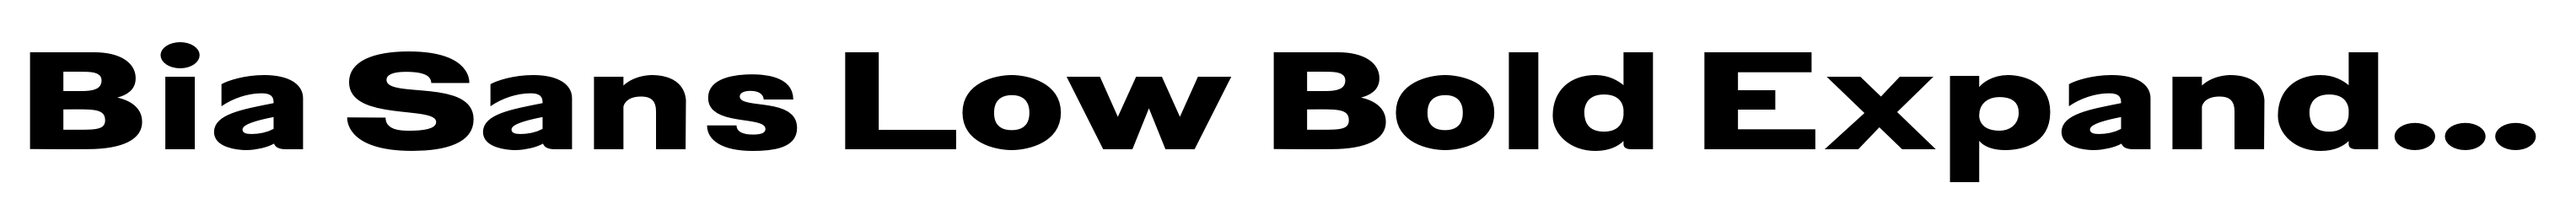 Bia Sans Low Bold Expanded